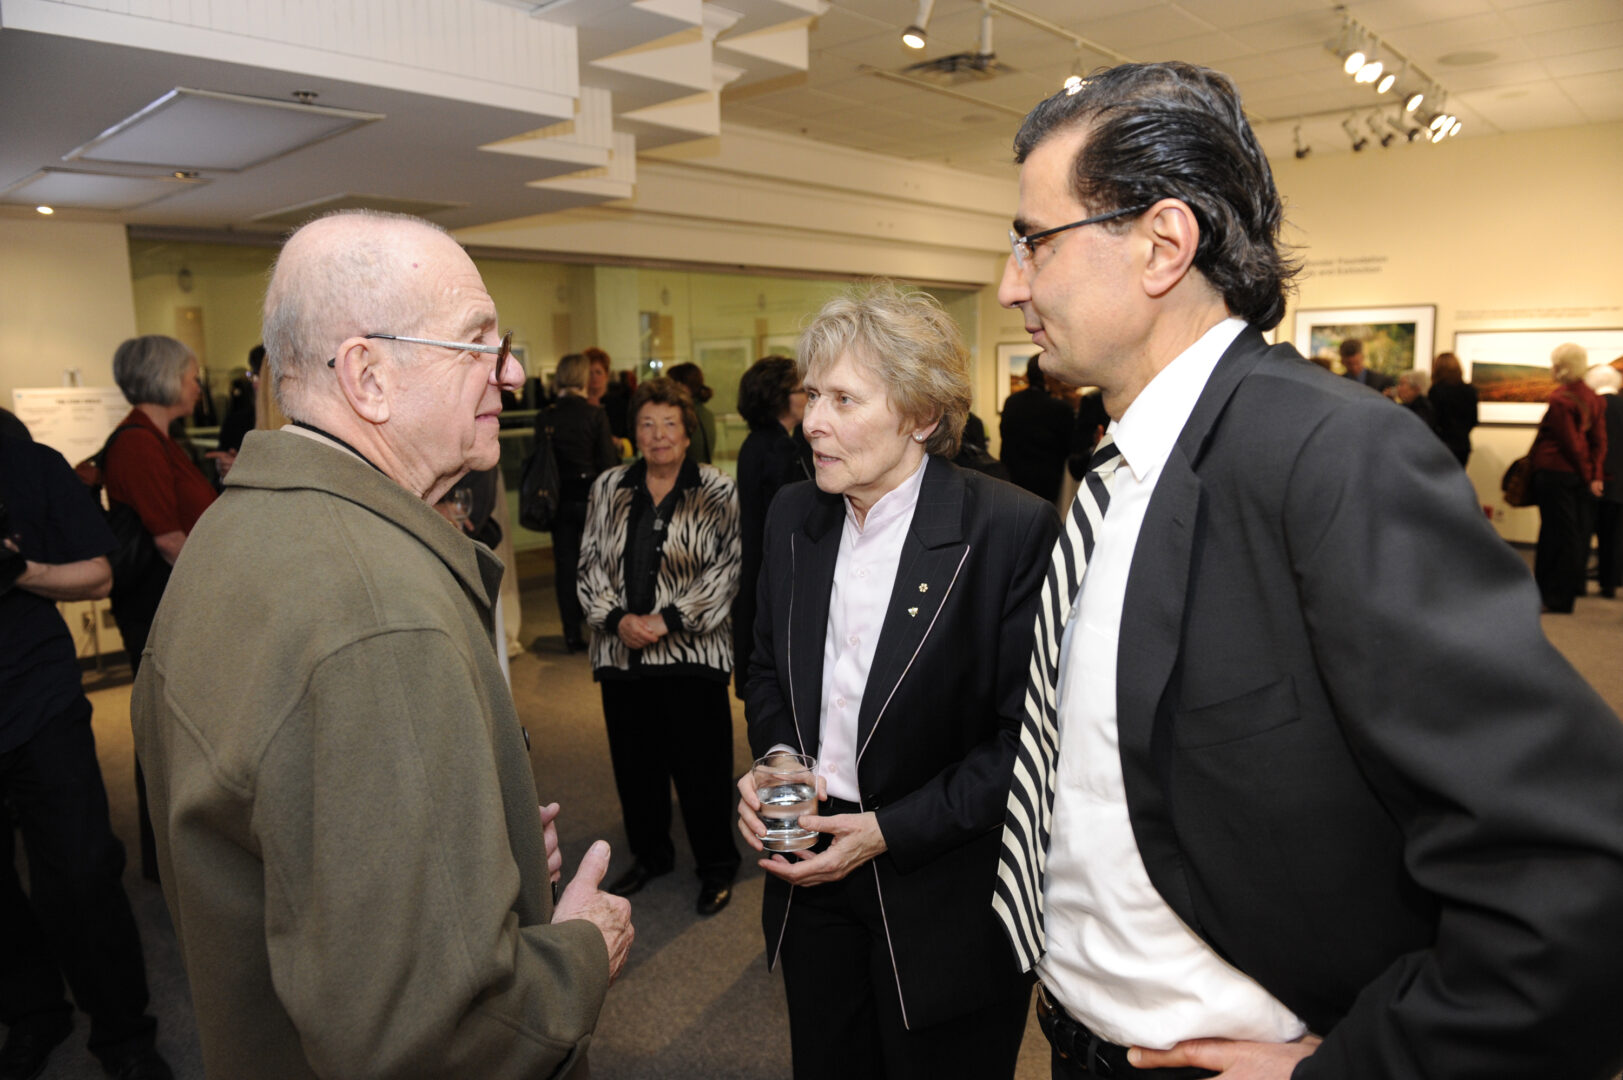 Dr. Bondar talking to people in a gallery